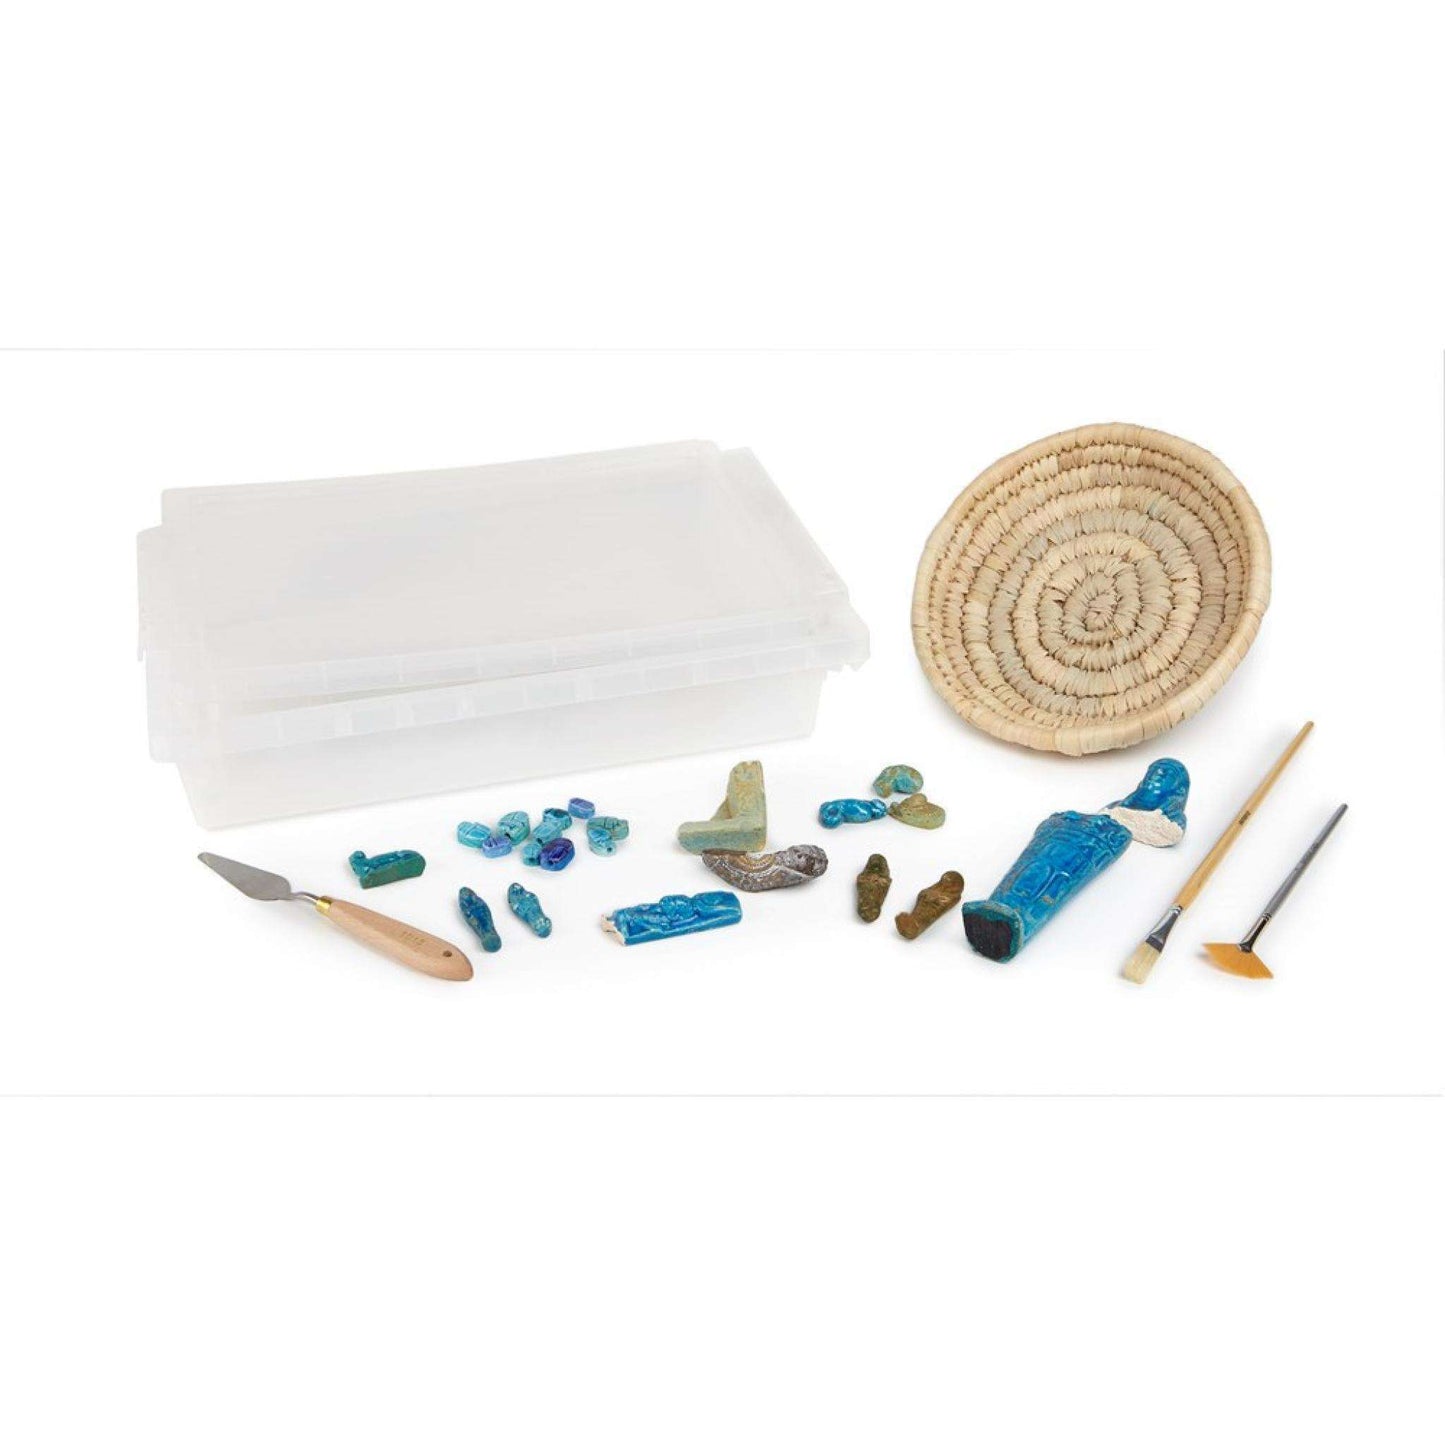 Ancient Egypt Archaeological Dig Starter Pack:Primary Classroom Resources